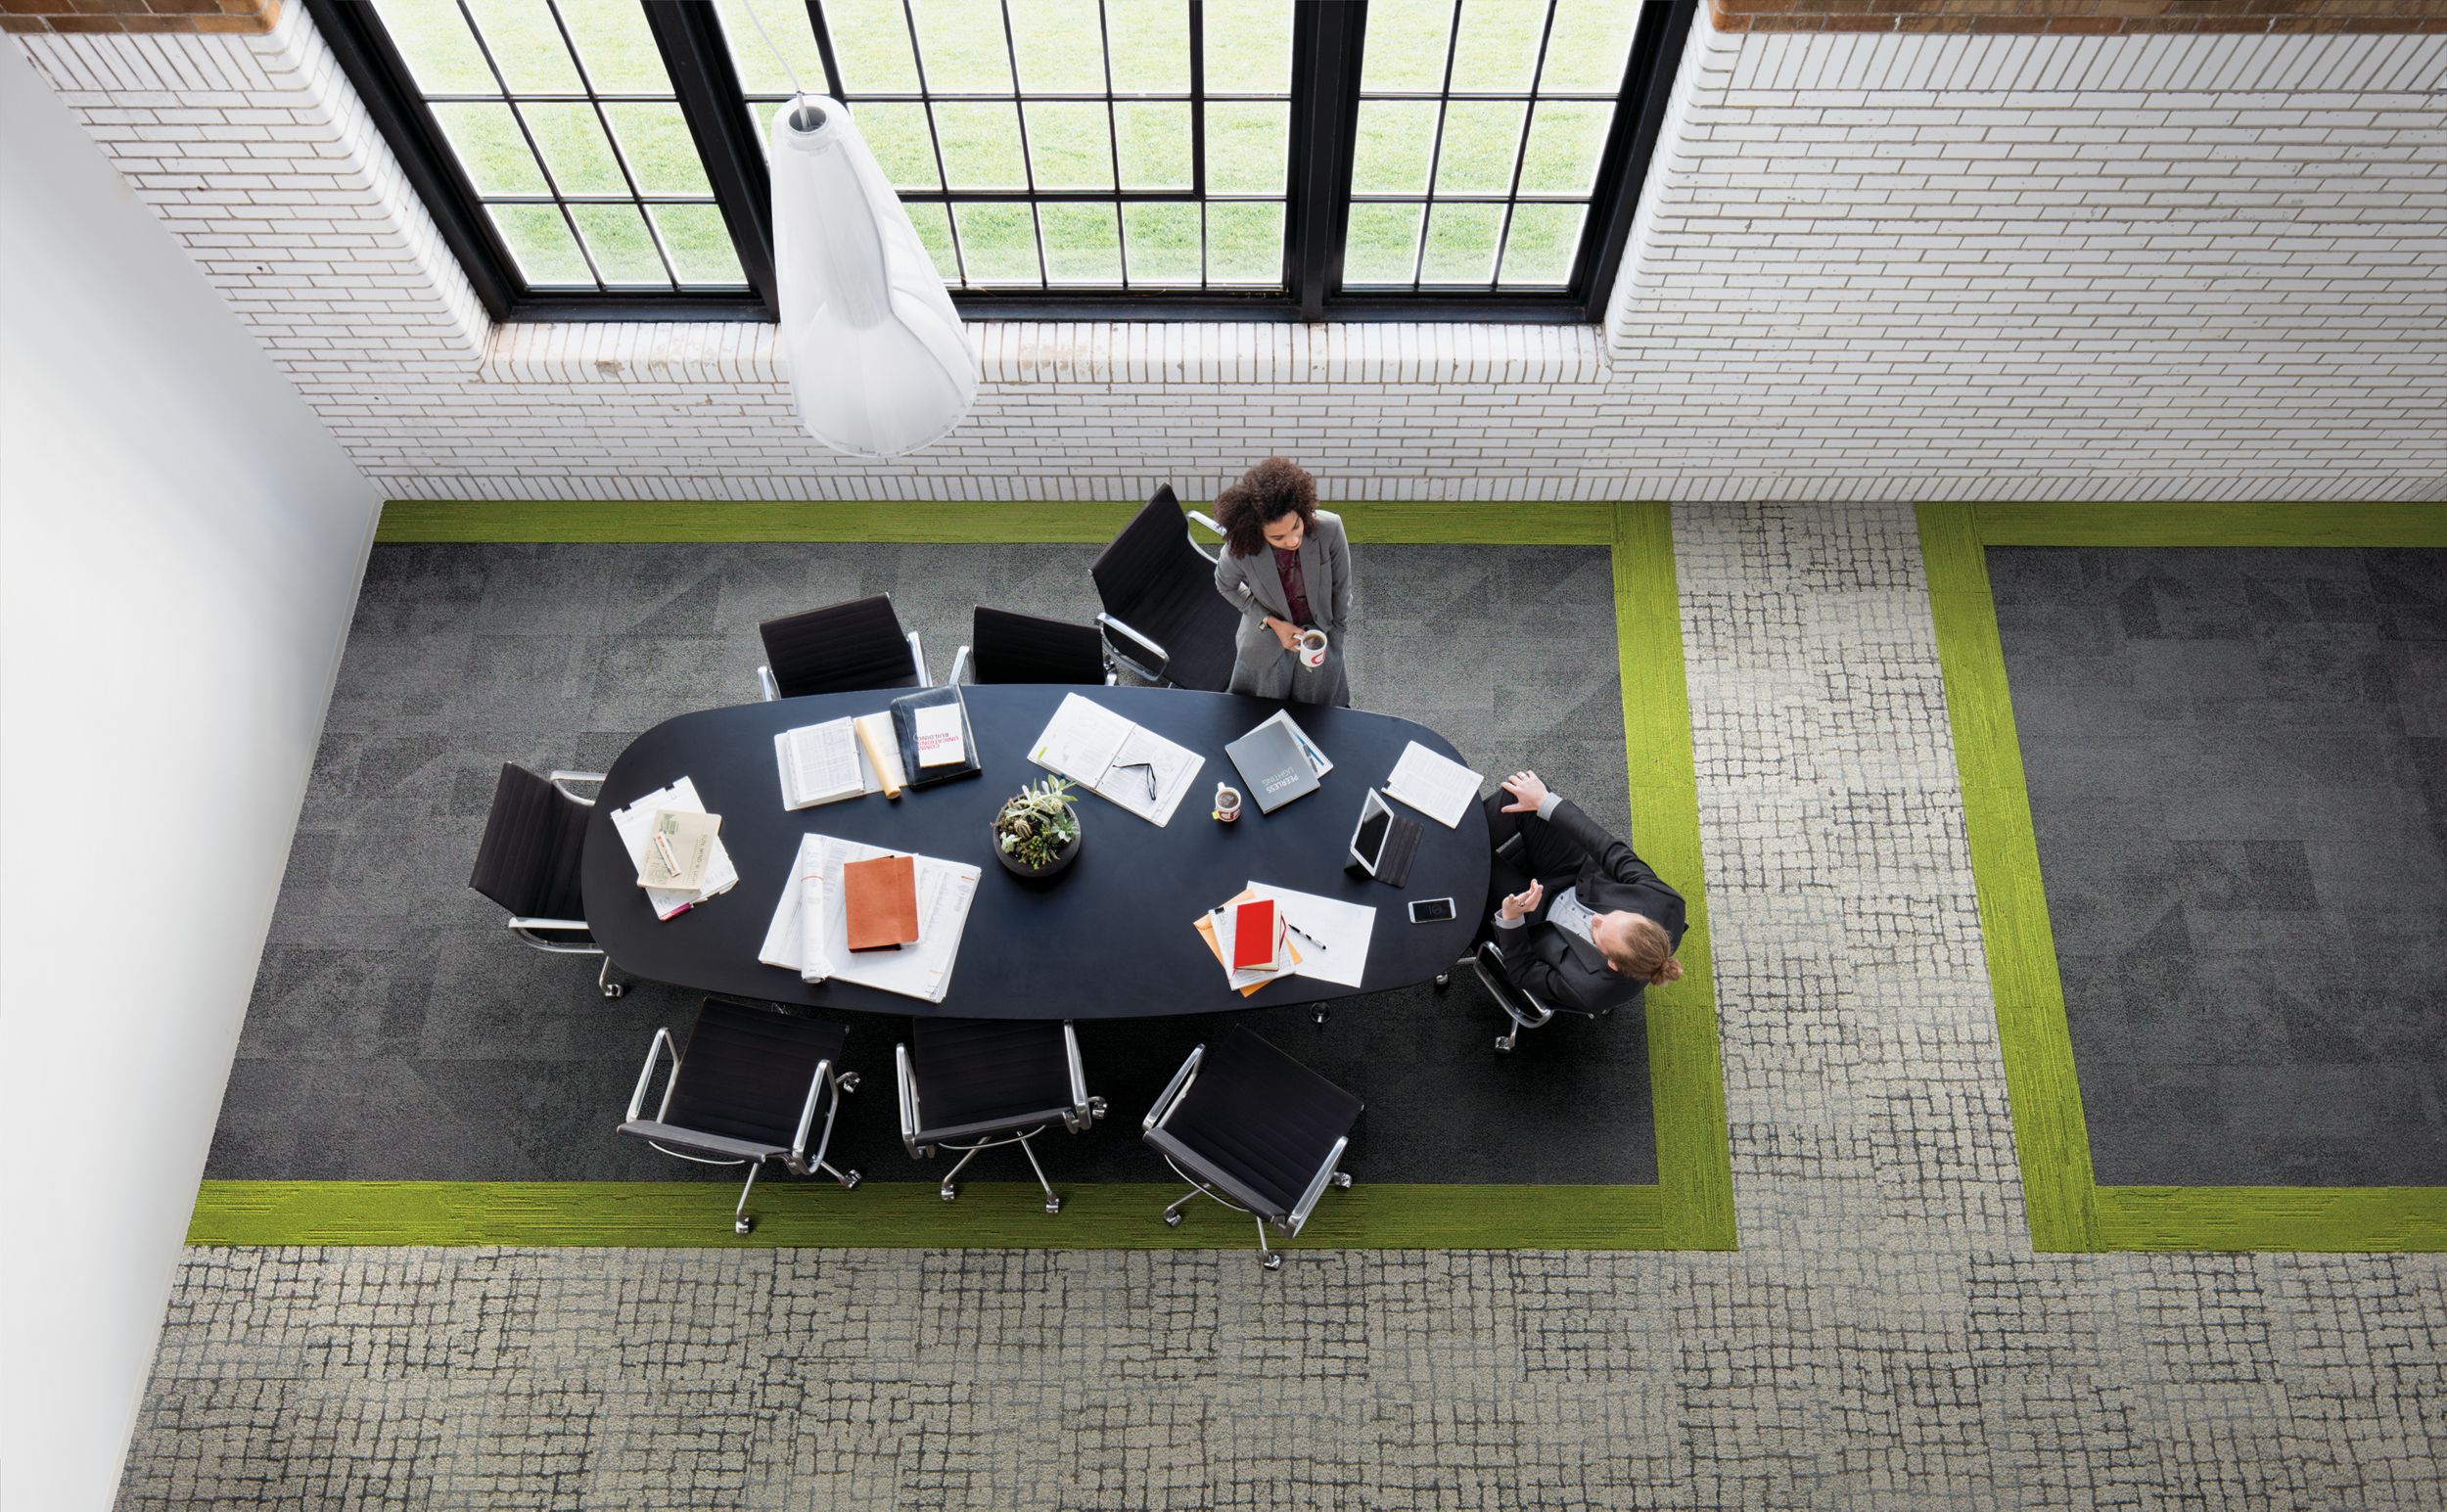 Interface Paver and Sett in Stone carpet tile with UR501 plank carpet tile in overhead view of meeting area with man and women conversating número de imagen 6